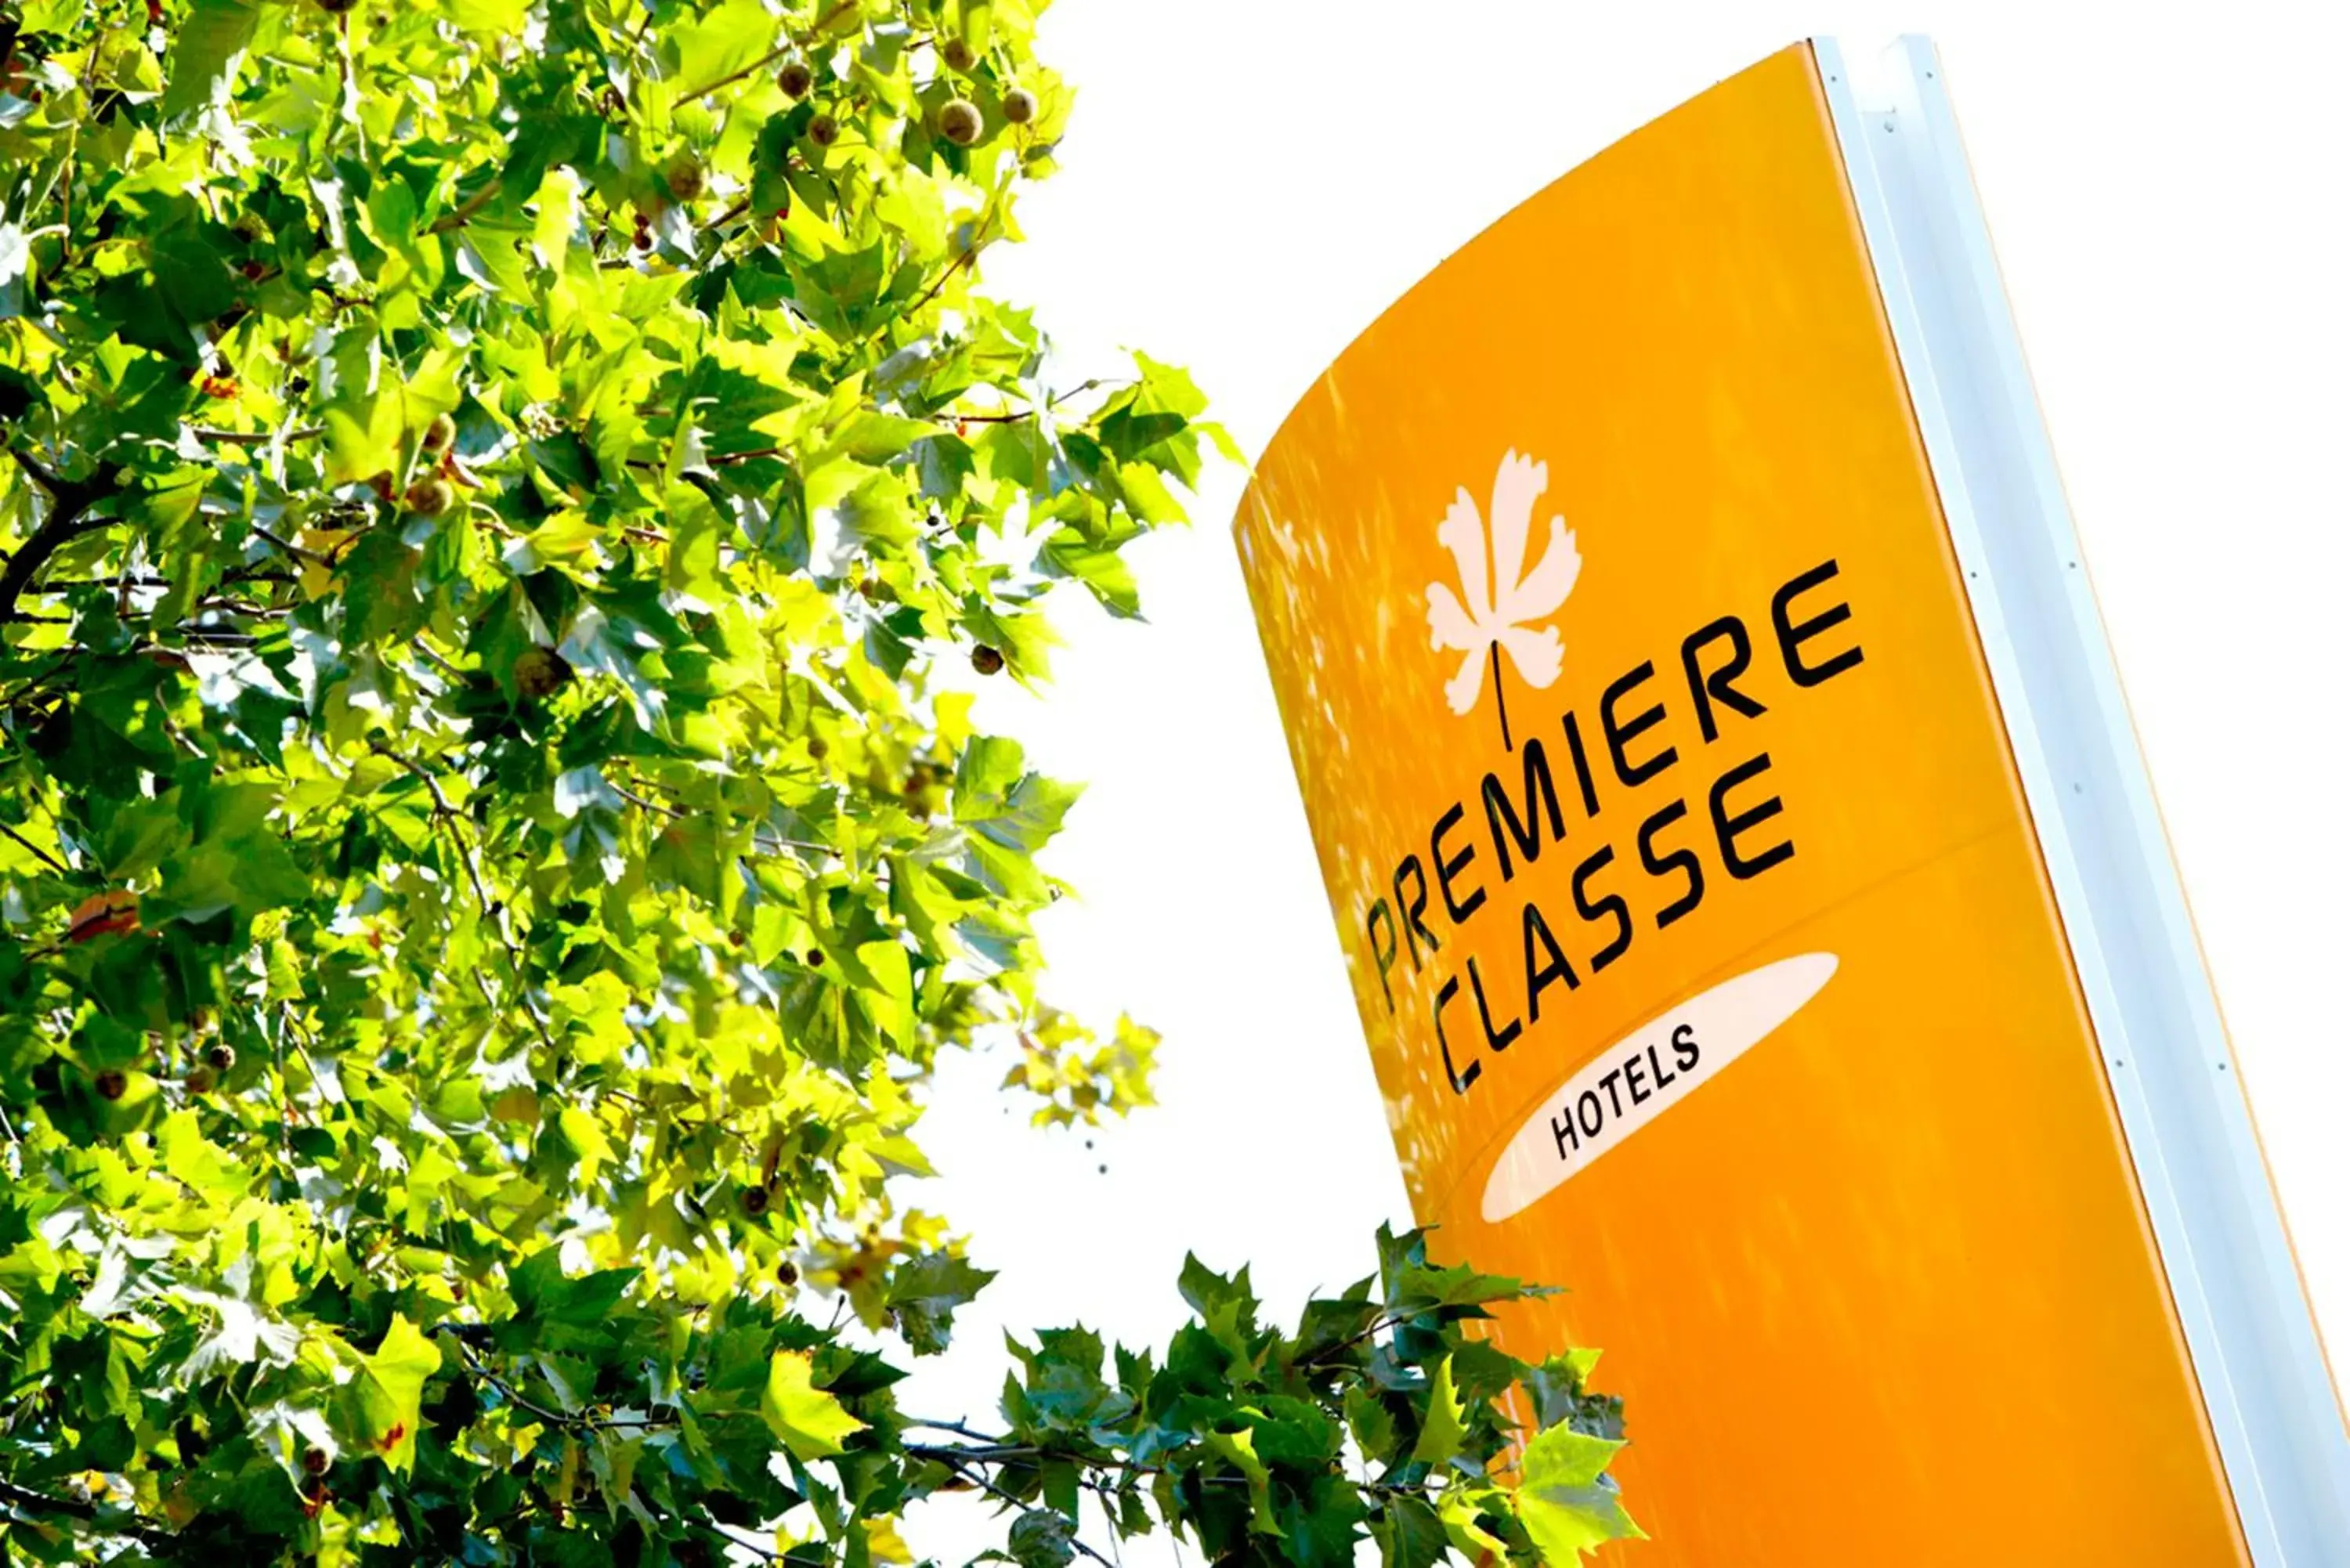 Property logo or sign, Property Logo/Sign in Premiere Classe Epinal